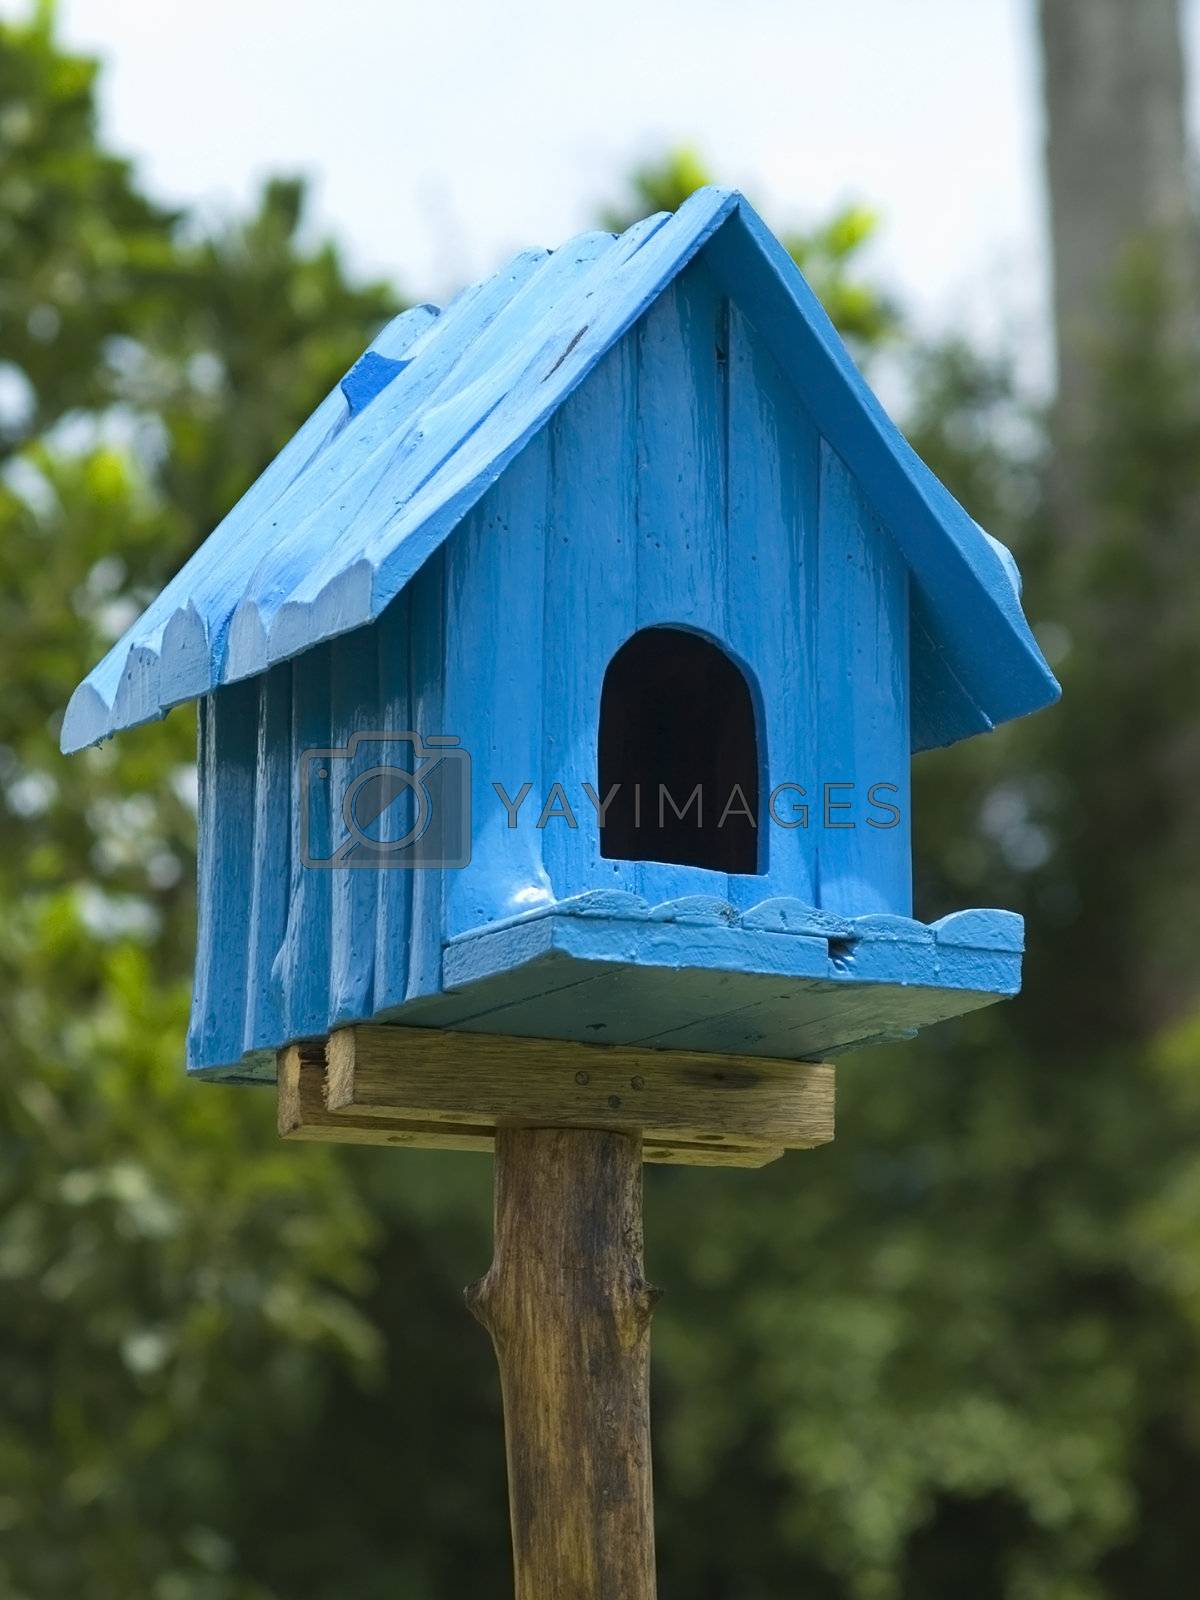 Royalty free image of Blue birdhouse by epixx